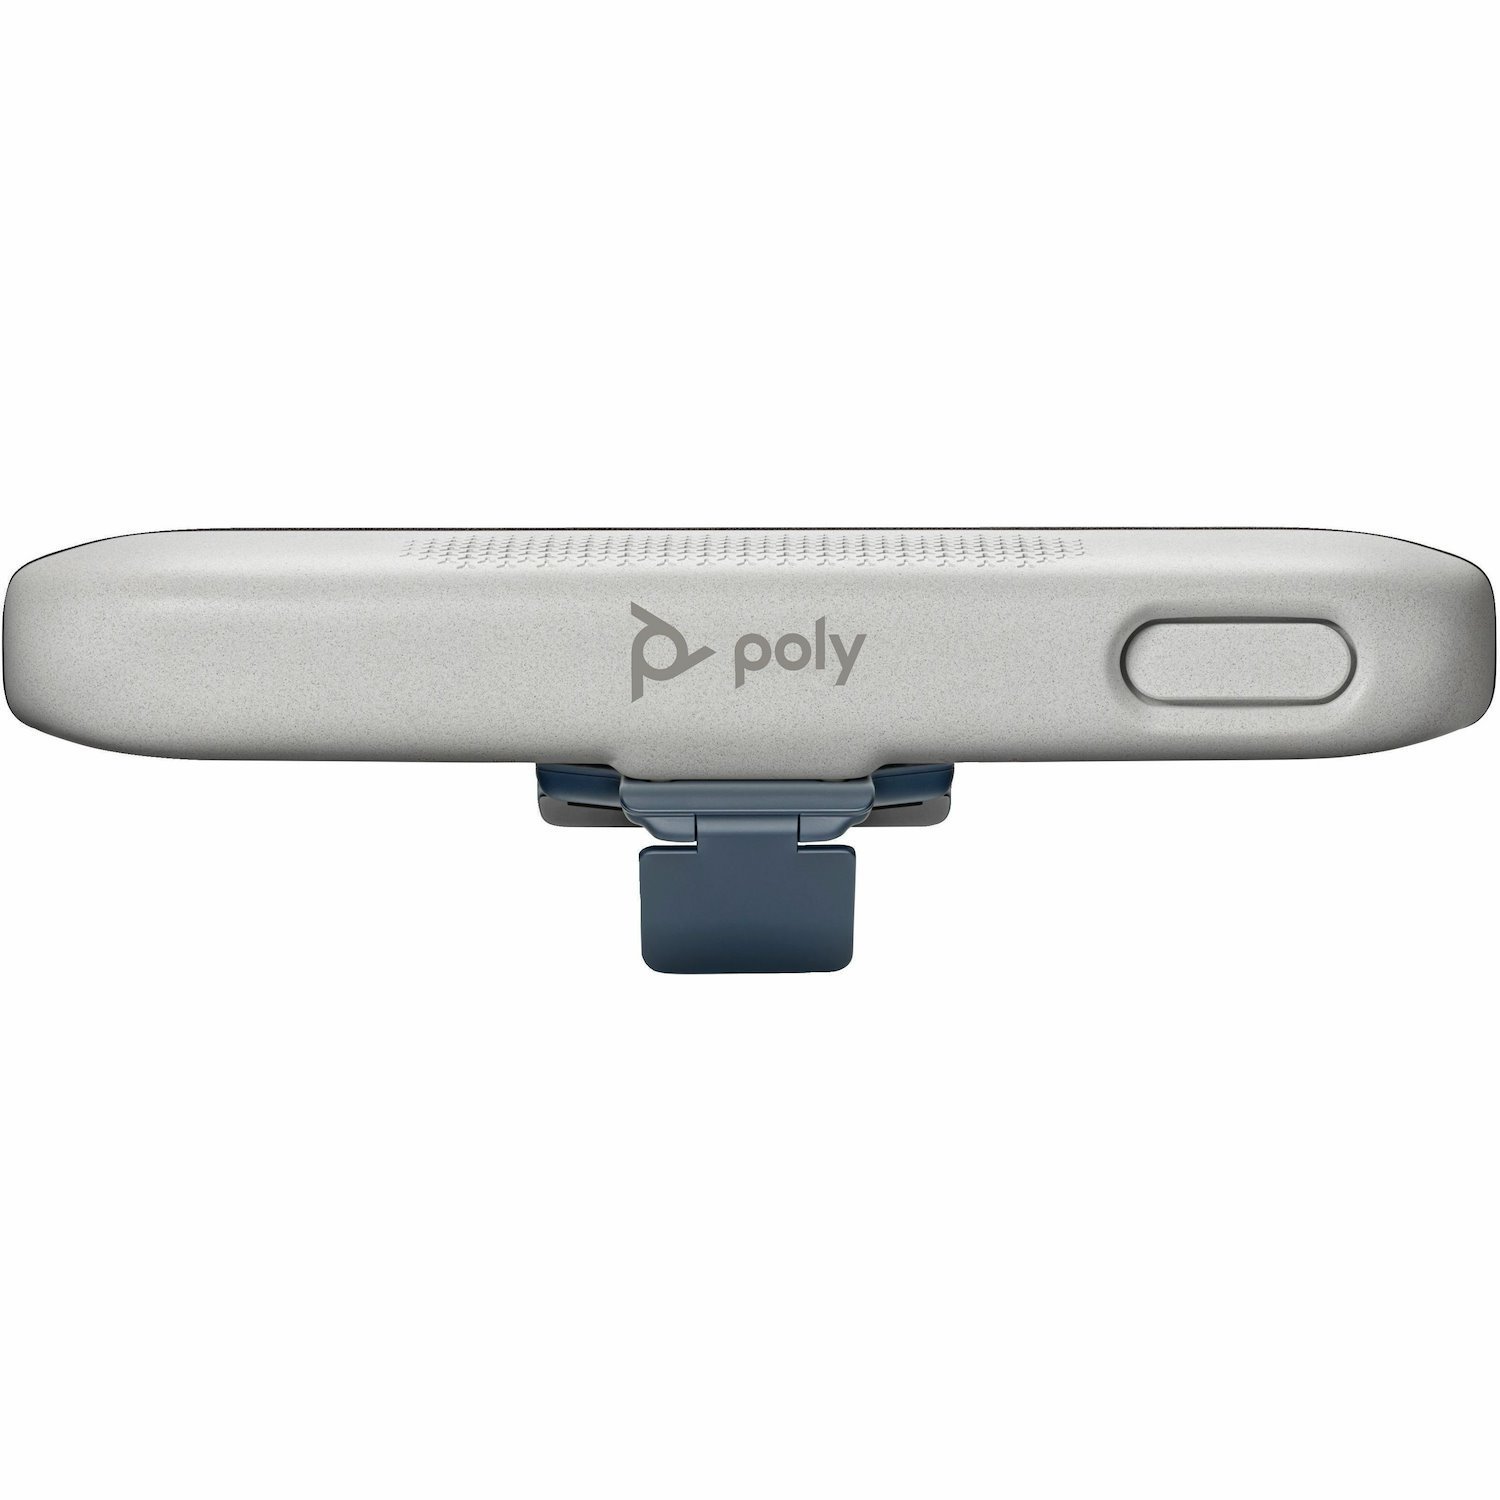 Poly Studio P15 Video Conference Equipment